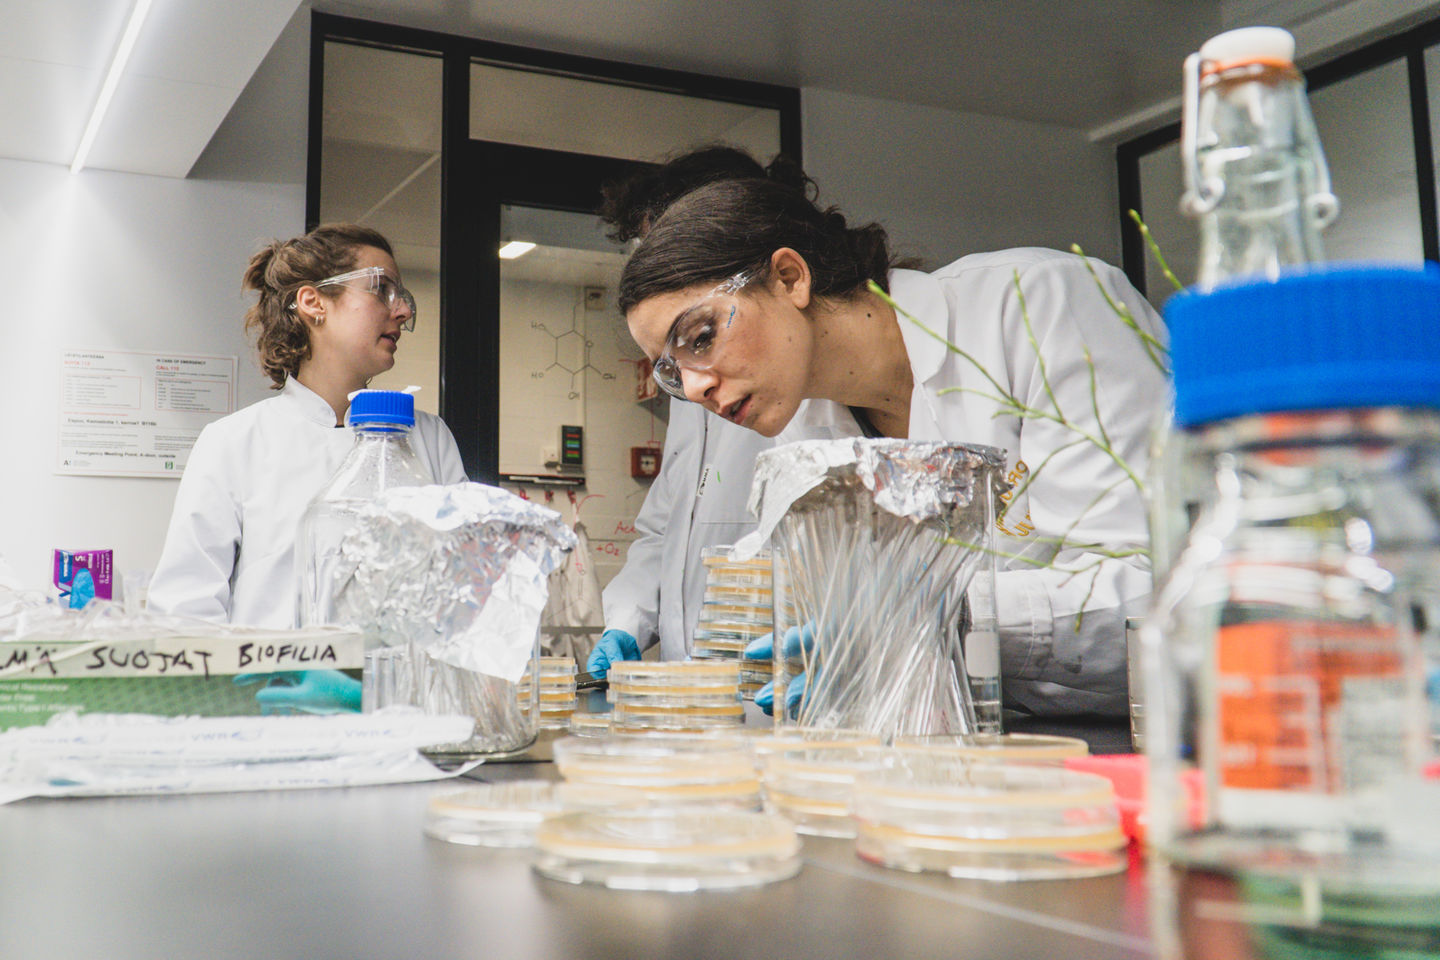 A student arches over the laboratory workspace to look more closely at some of the petri dishes laid out before her. In the background, two students converse with each other.